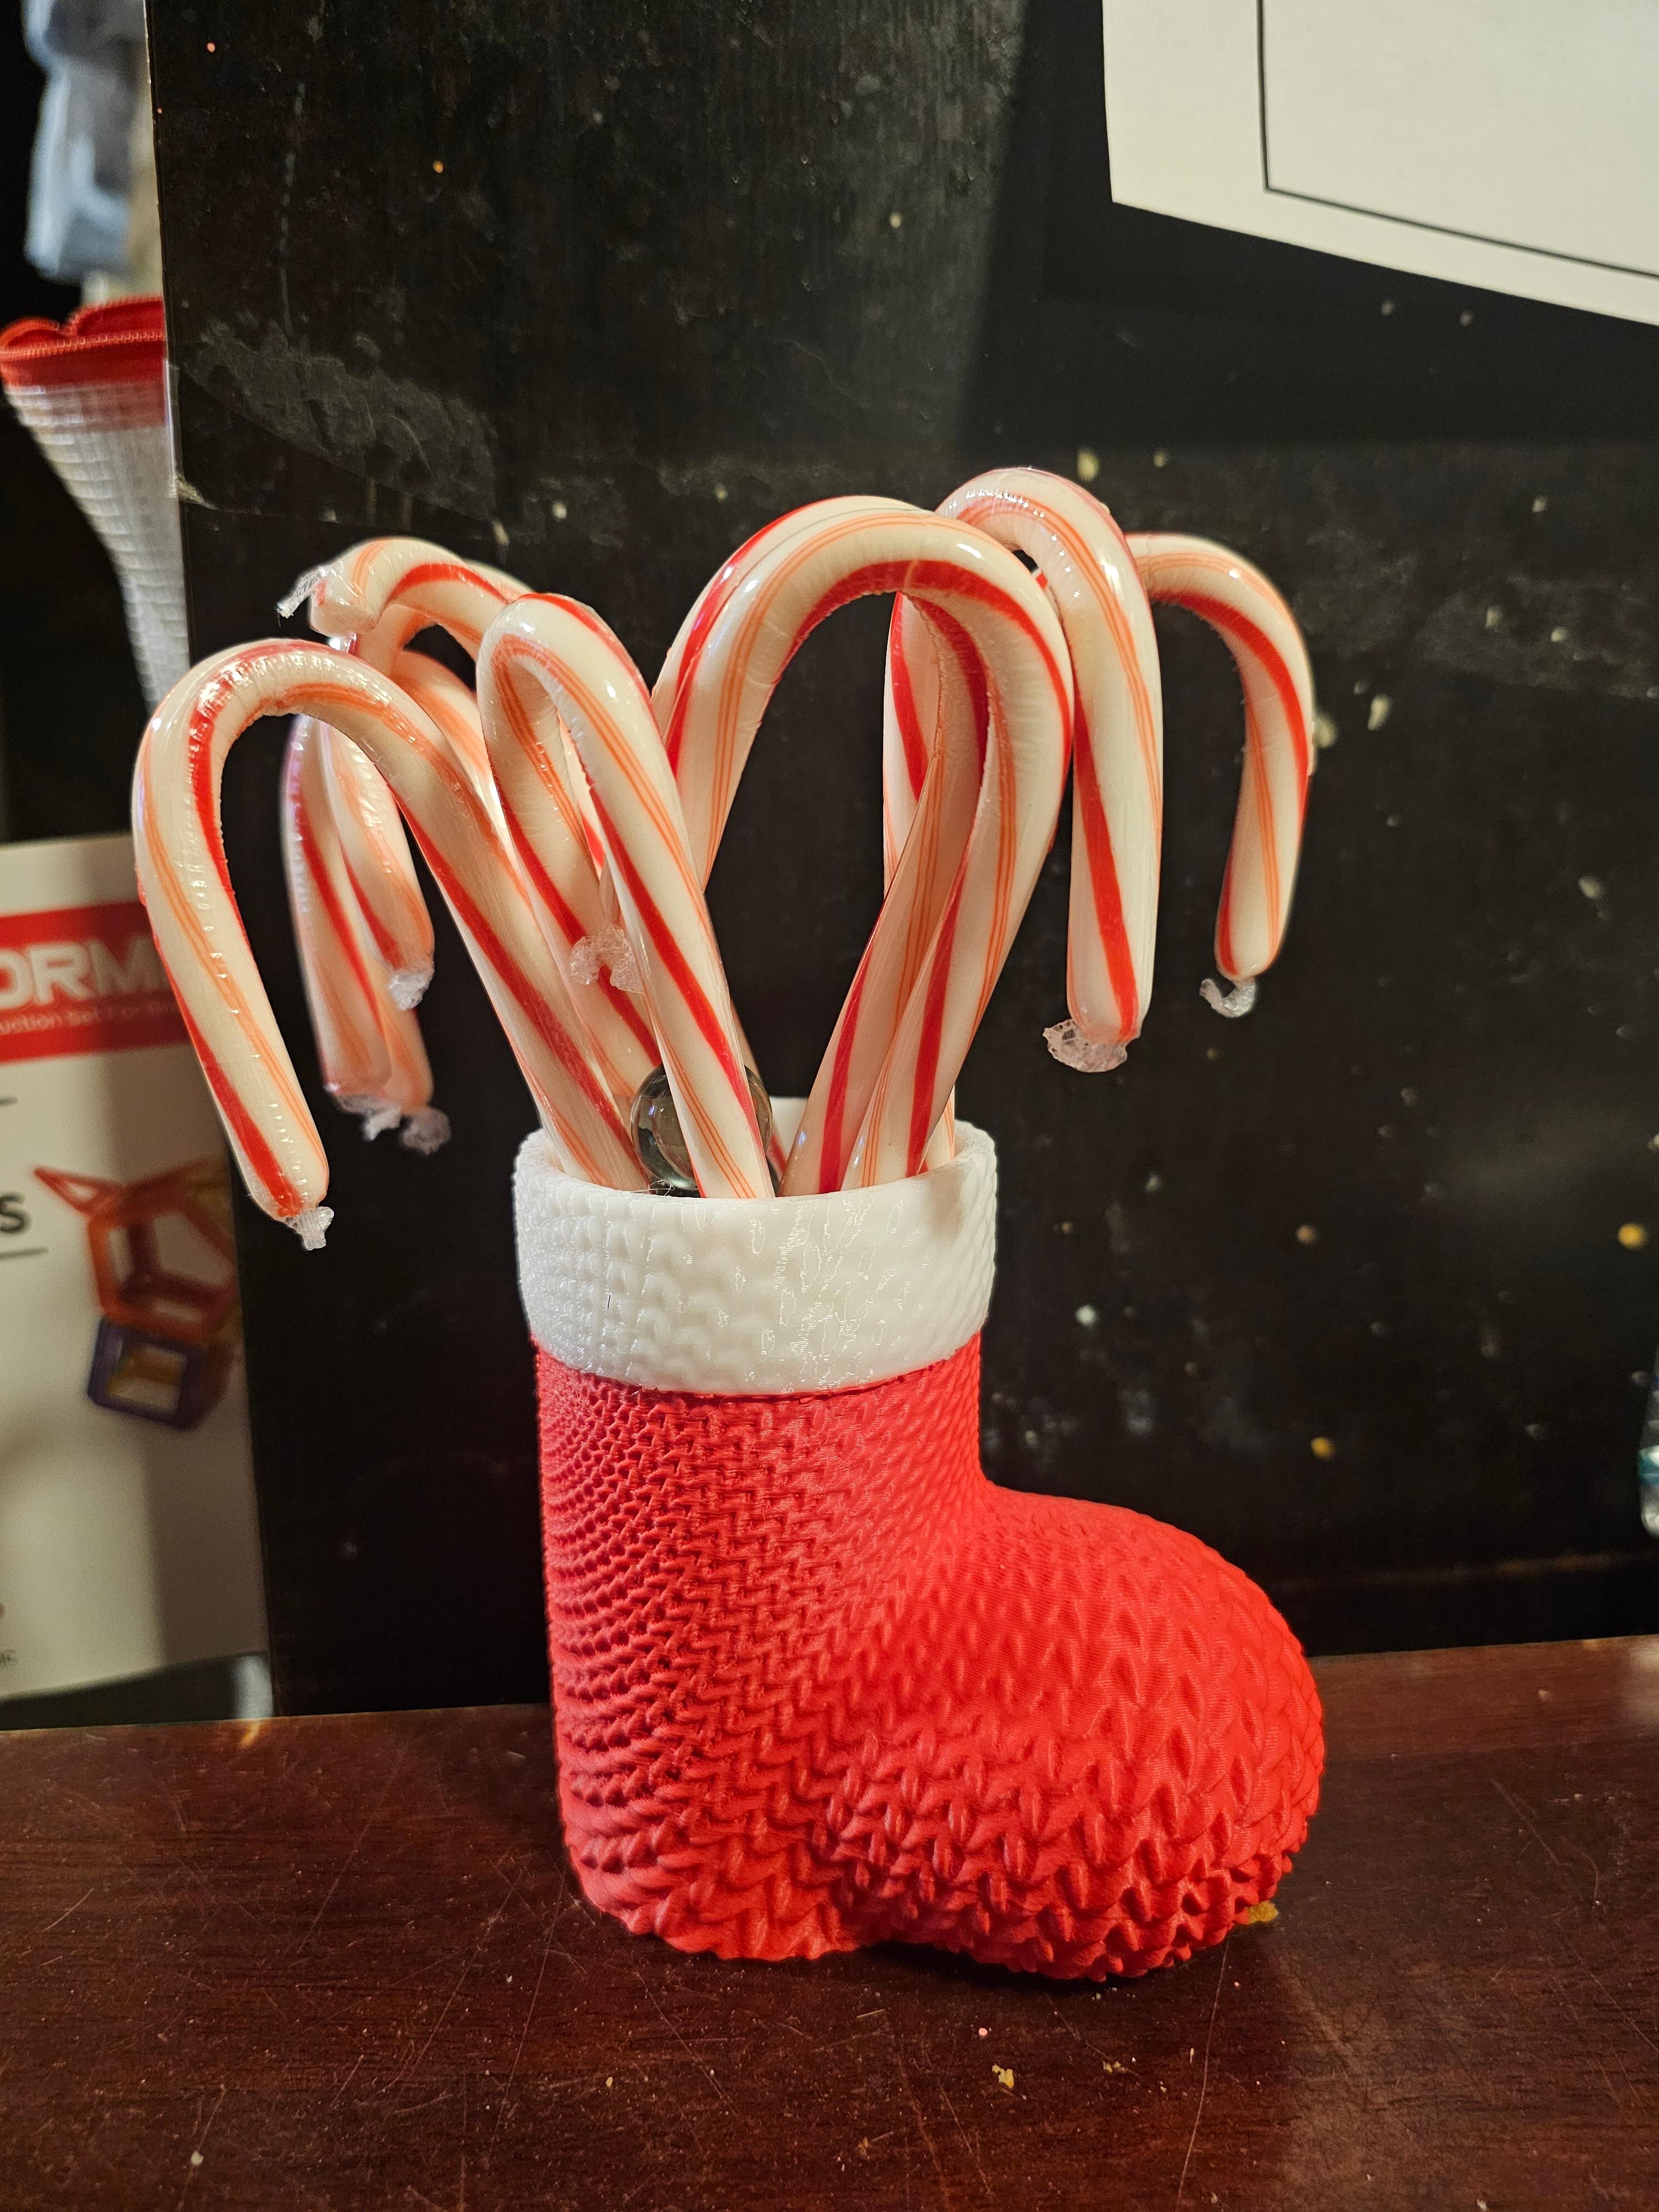 xmas knitted stocking cup .stl 3d model